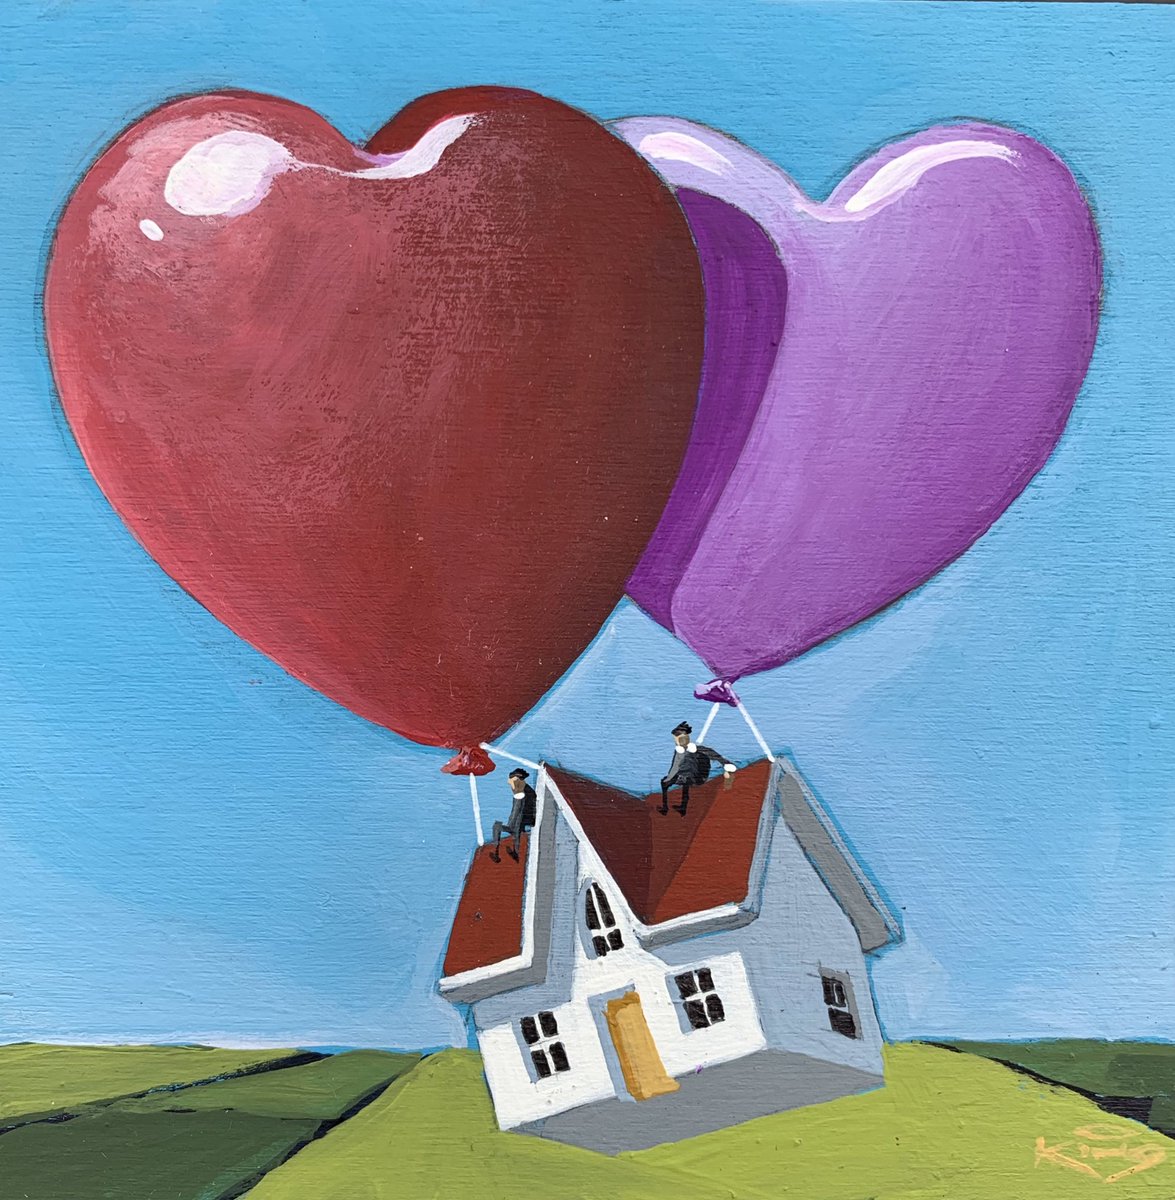 If you’re like me & thought the opening montage of “Up” was way too sad/heartbreaking, I’ve made an alternate scenario where the couple float away together on Valentine’s Day…

Part of this year’s #WallofHarts auction, place a bid & 100% goes to @HeartFDN 32auctions.com/organizations/…